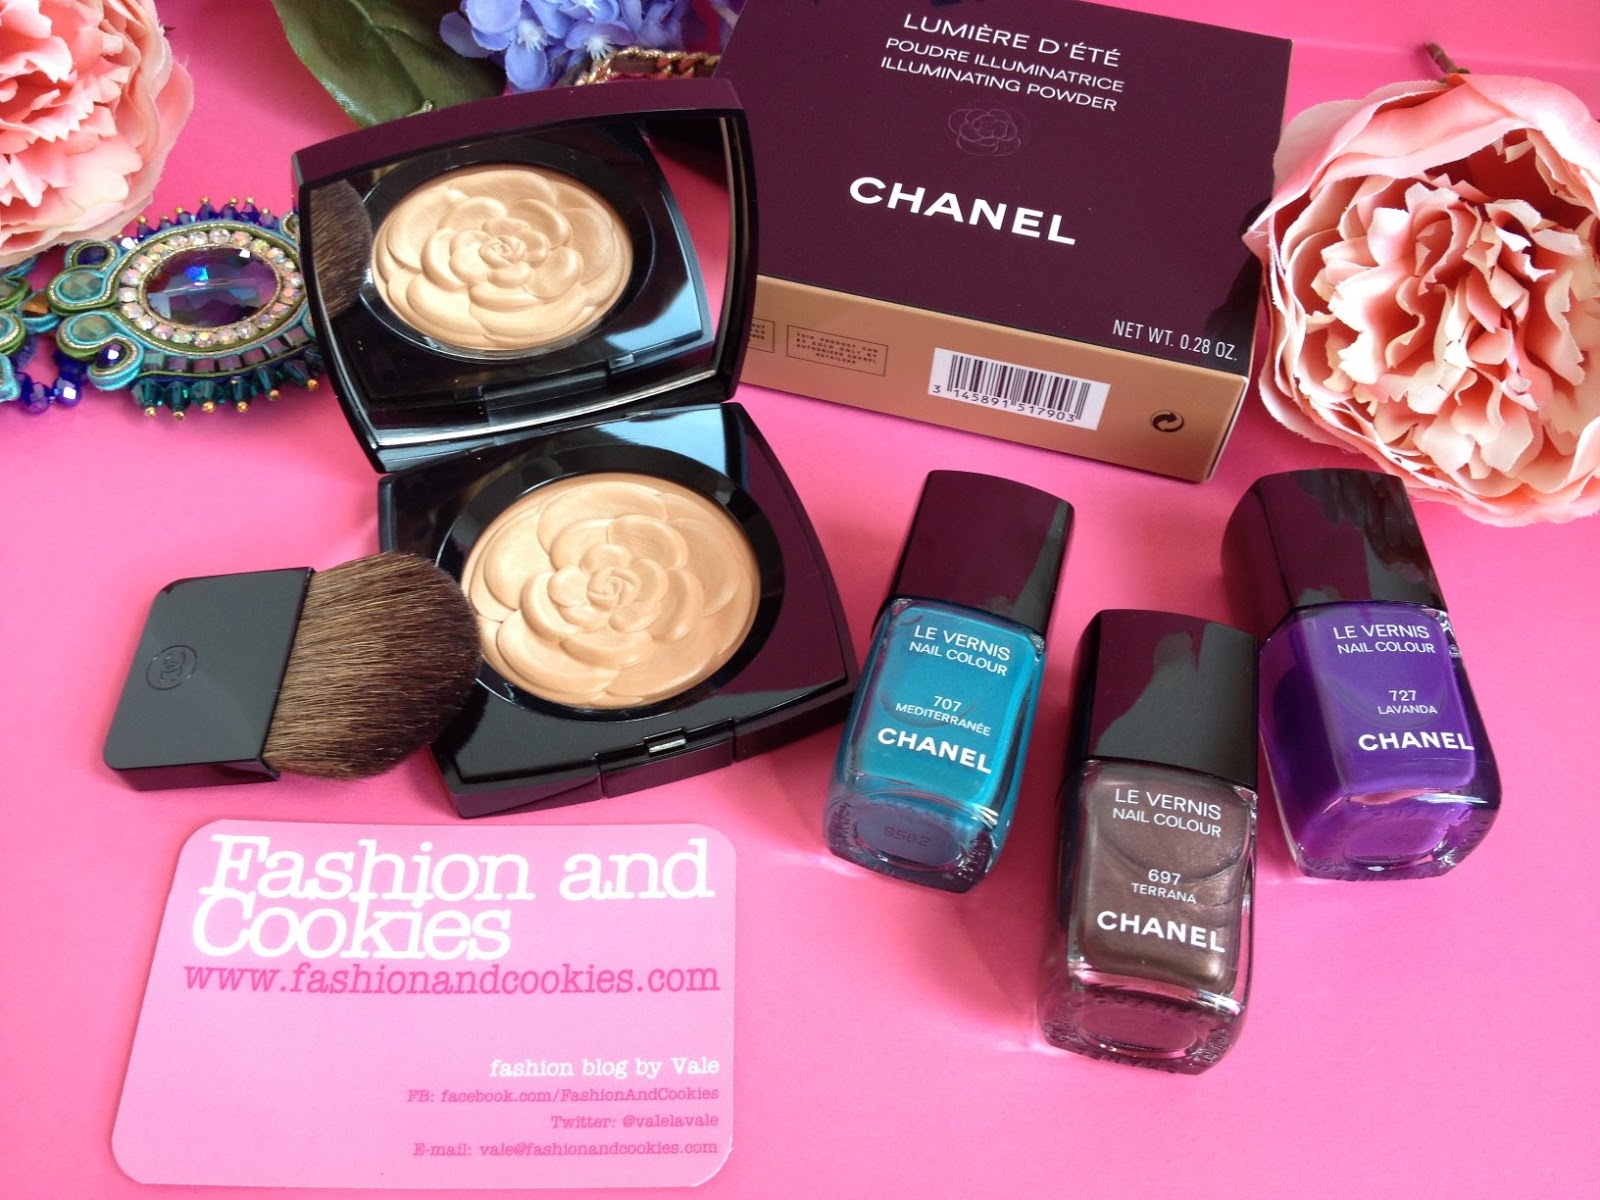 Chanel summer 2015 collection Mediterranee, Chanel summer makeup collection on Fashion and Cookies fashion blog